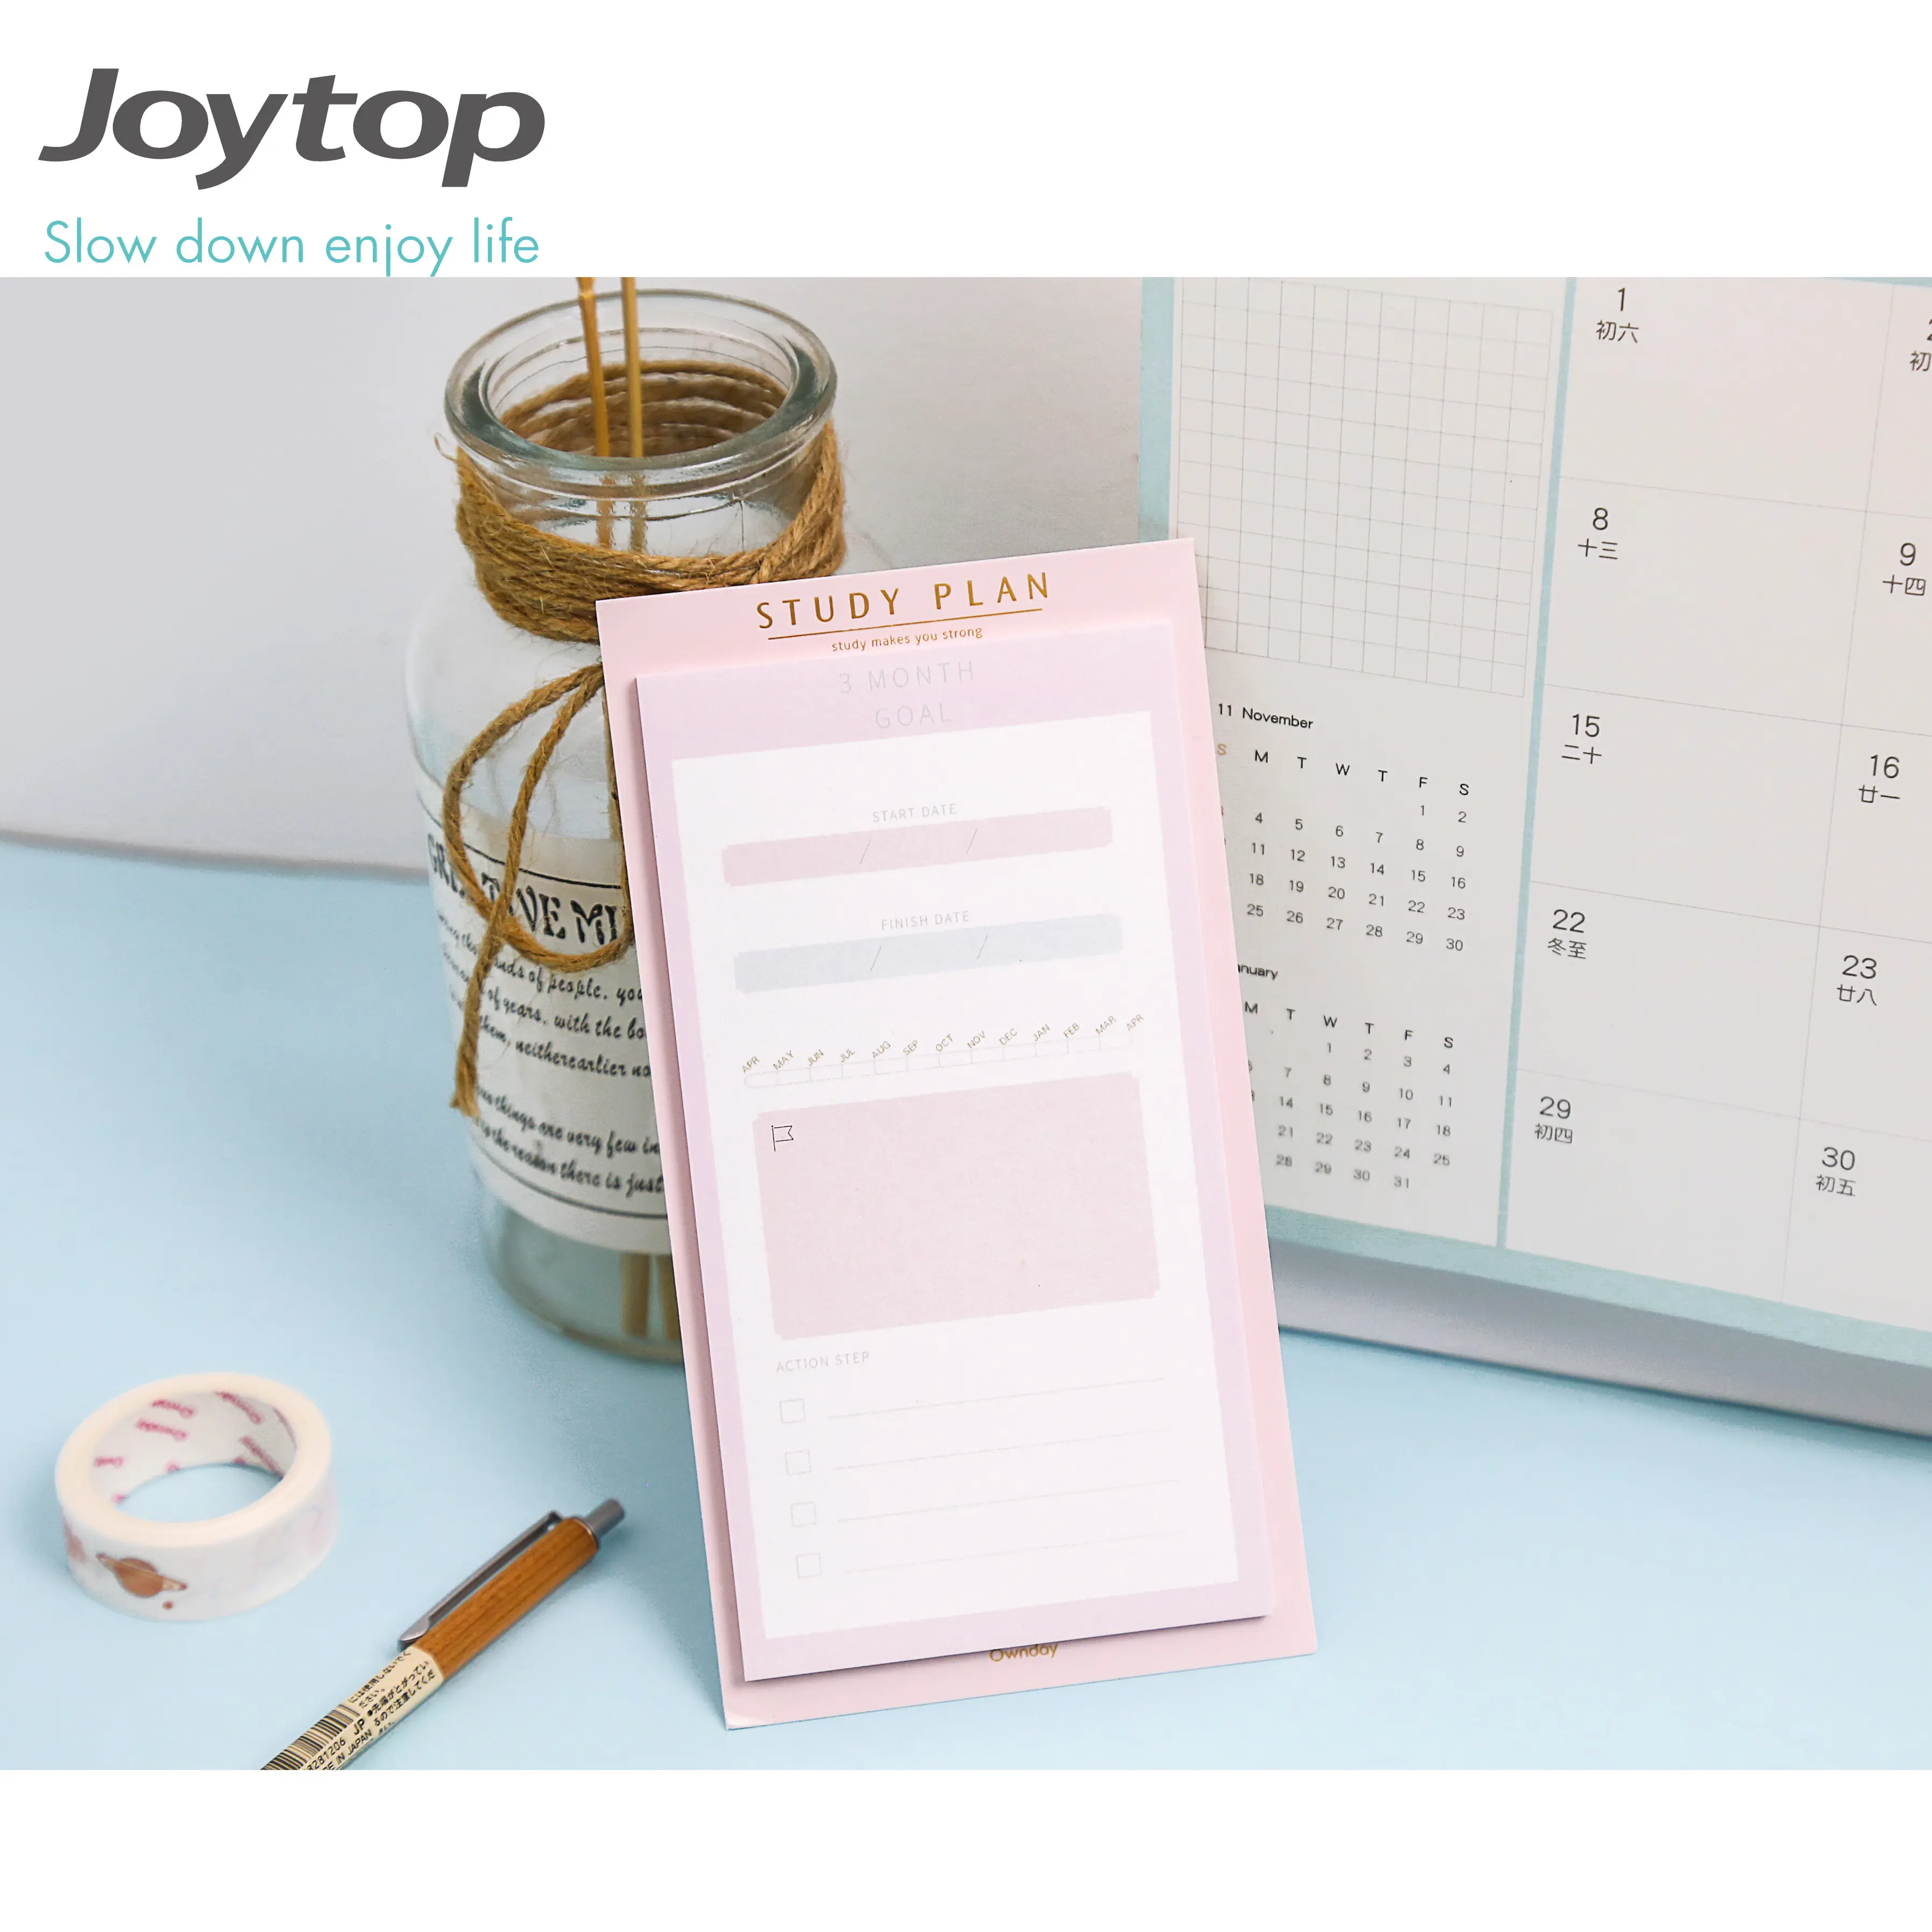 Ownday 101281 School Supplies Student To Do List Weekly Planner Memo Pad Sticky Notepads For Study Plan